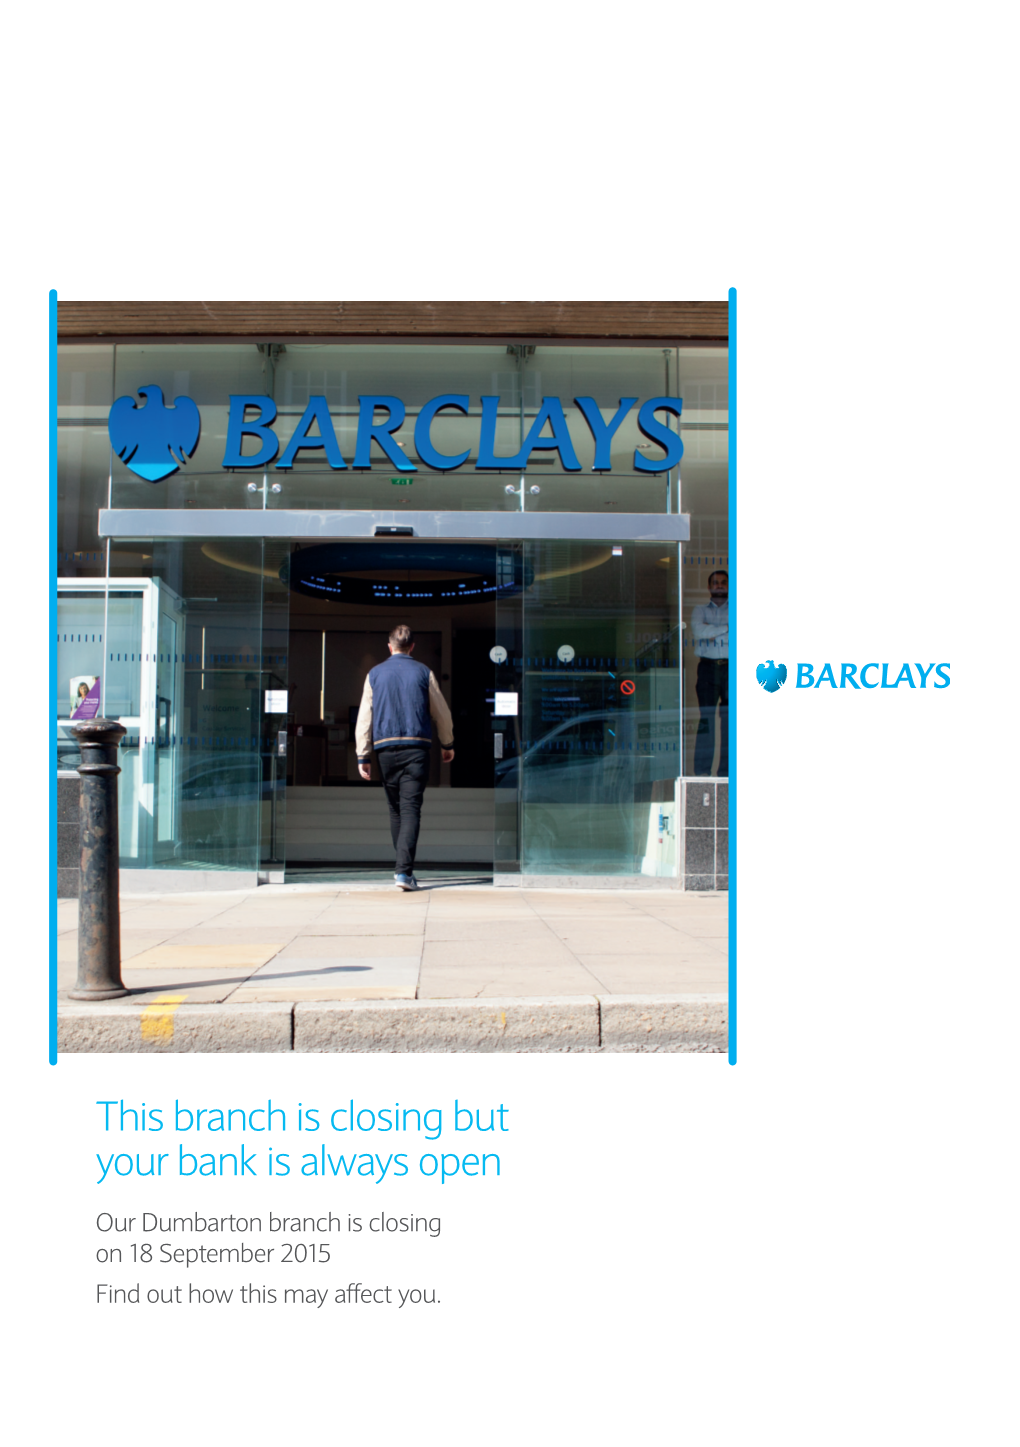 Dumbarton Branch Is Closing on 18 September 2015 Find out How This May Affect You